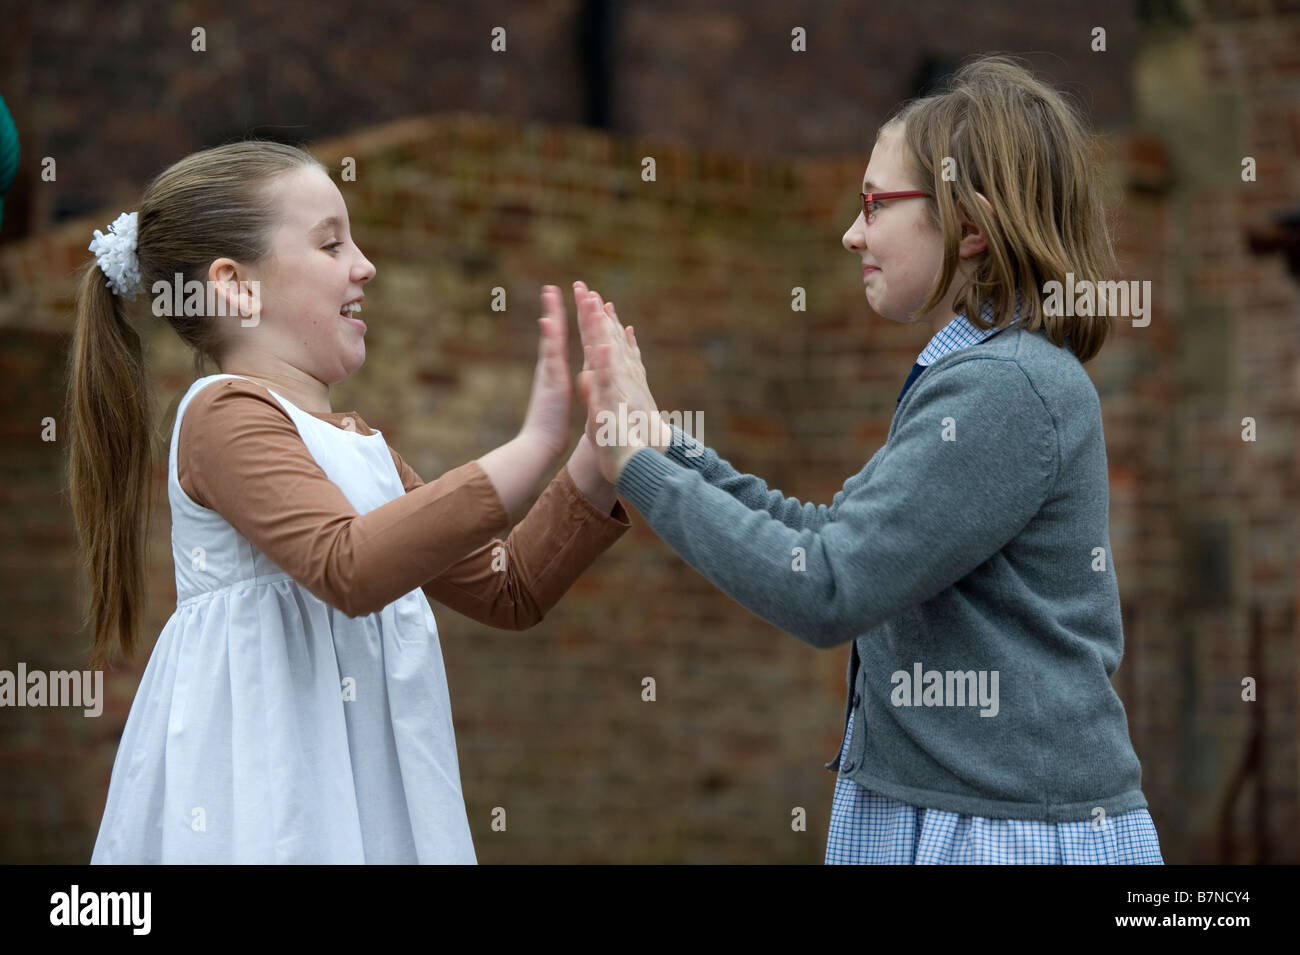 Children in Victorian costume, play clap hands in the playground, a traditional game. Stock Photo